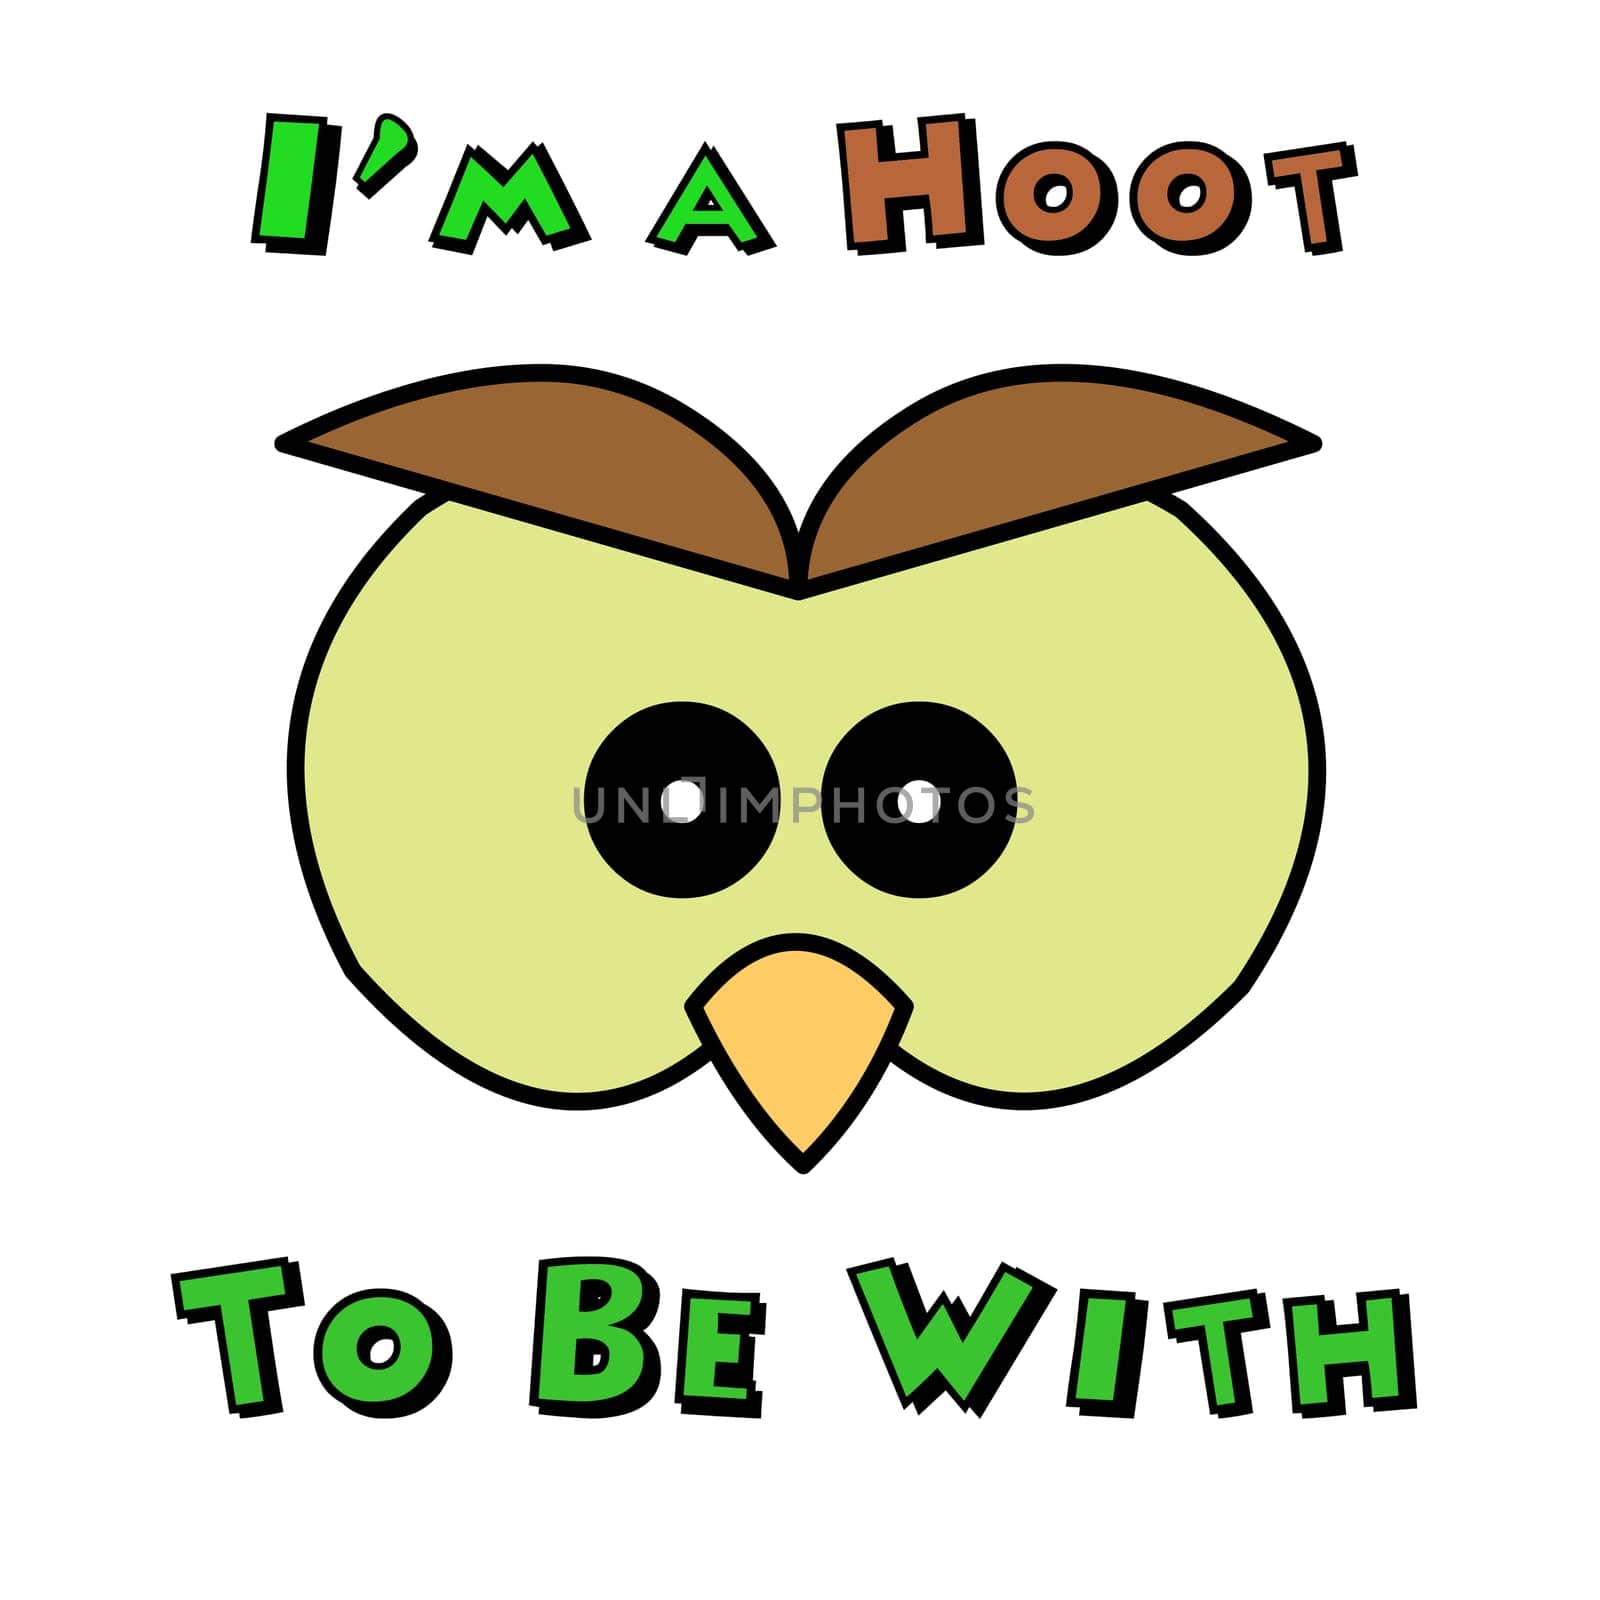 A angry owl face with text around it saying "I'm a hoot to be with".